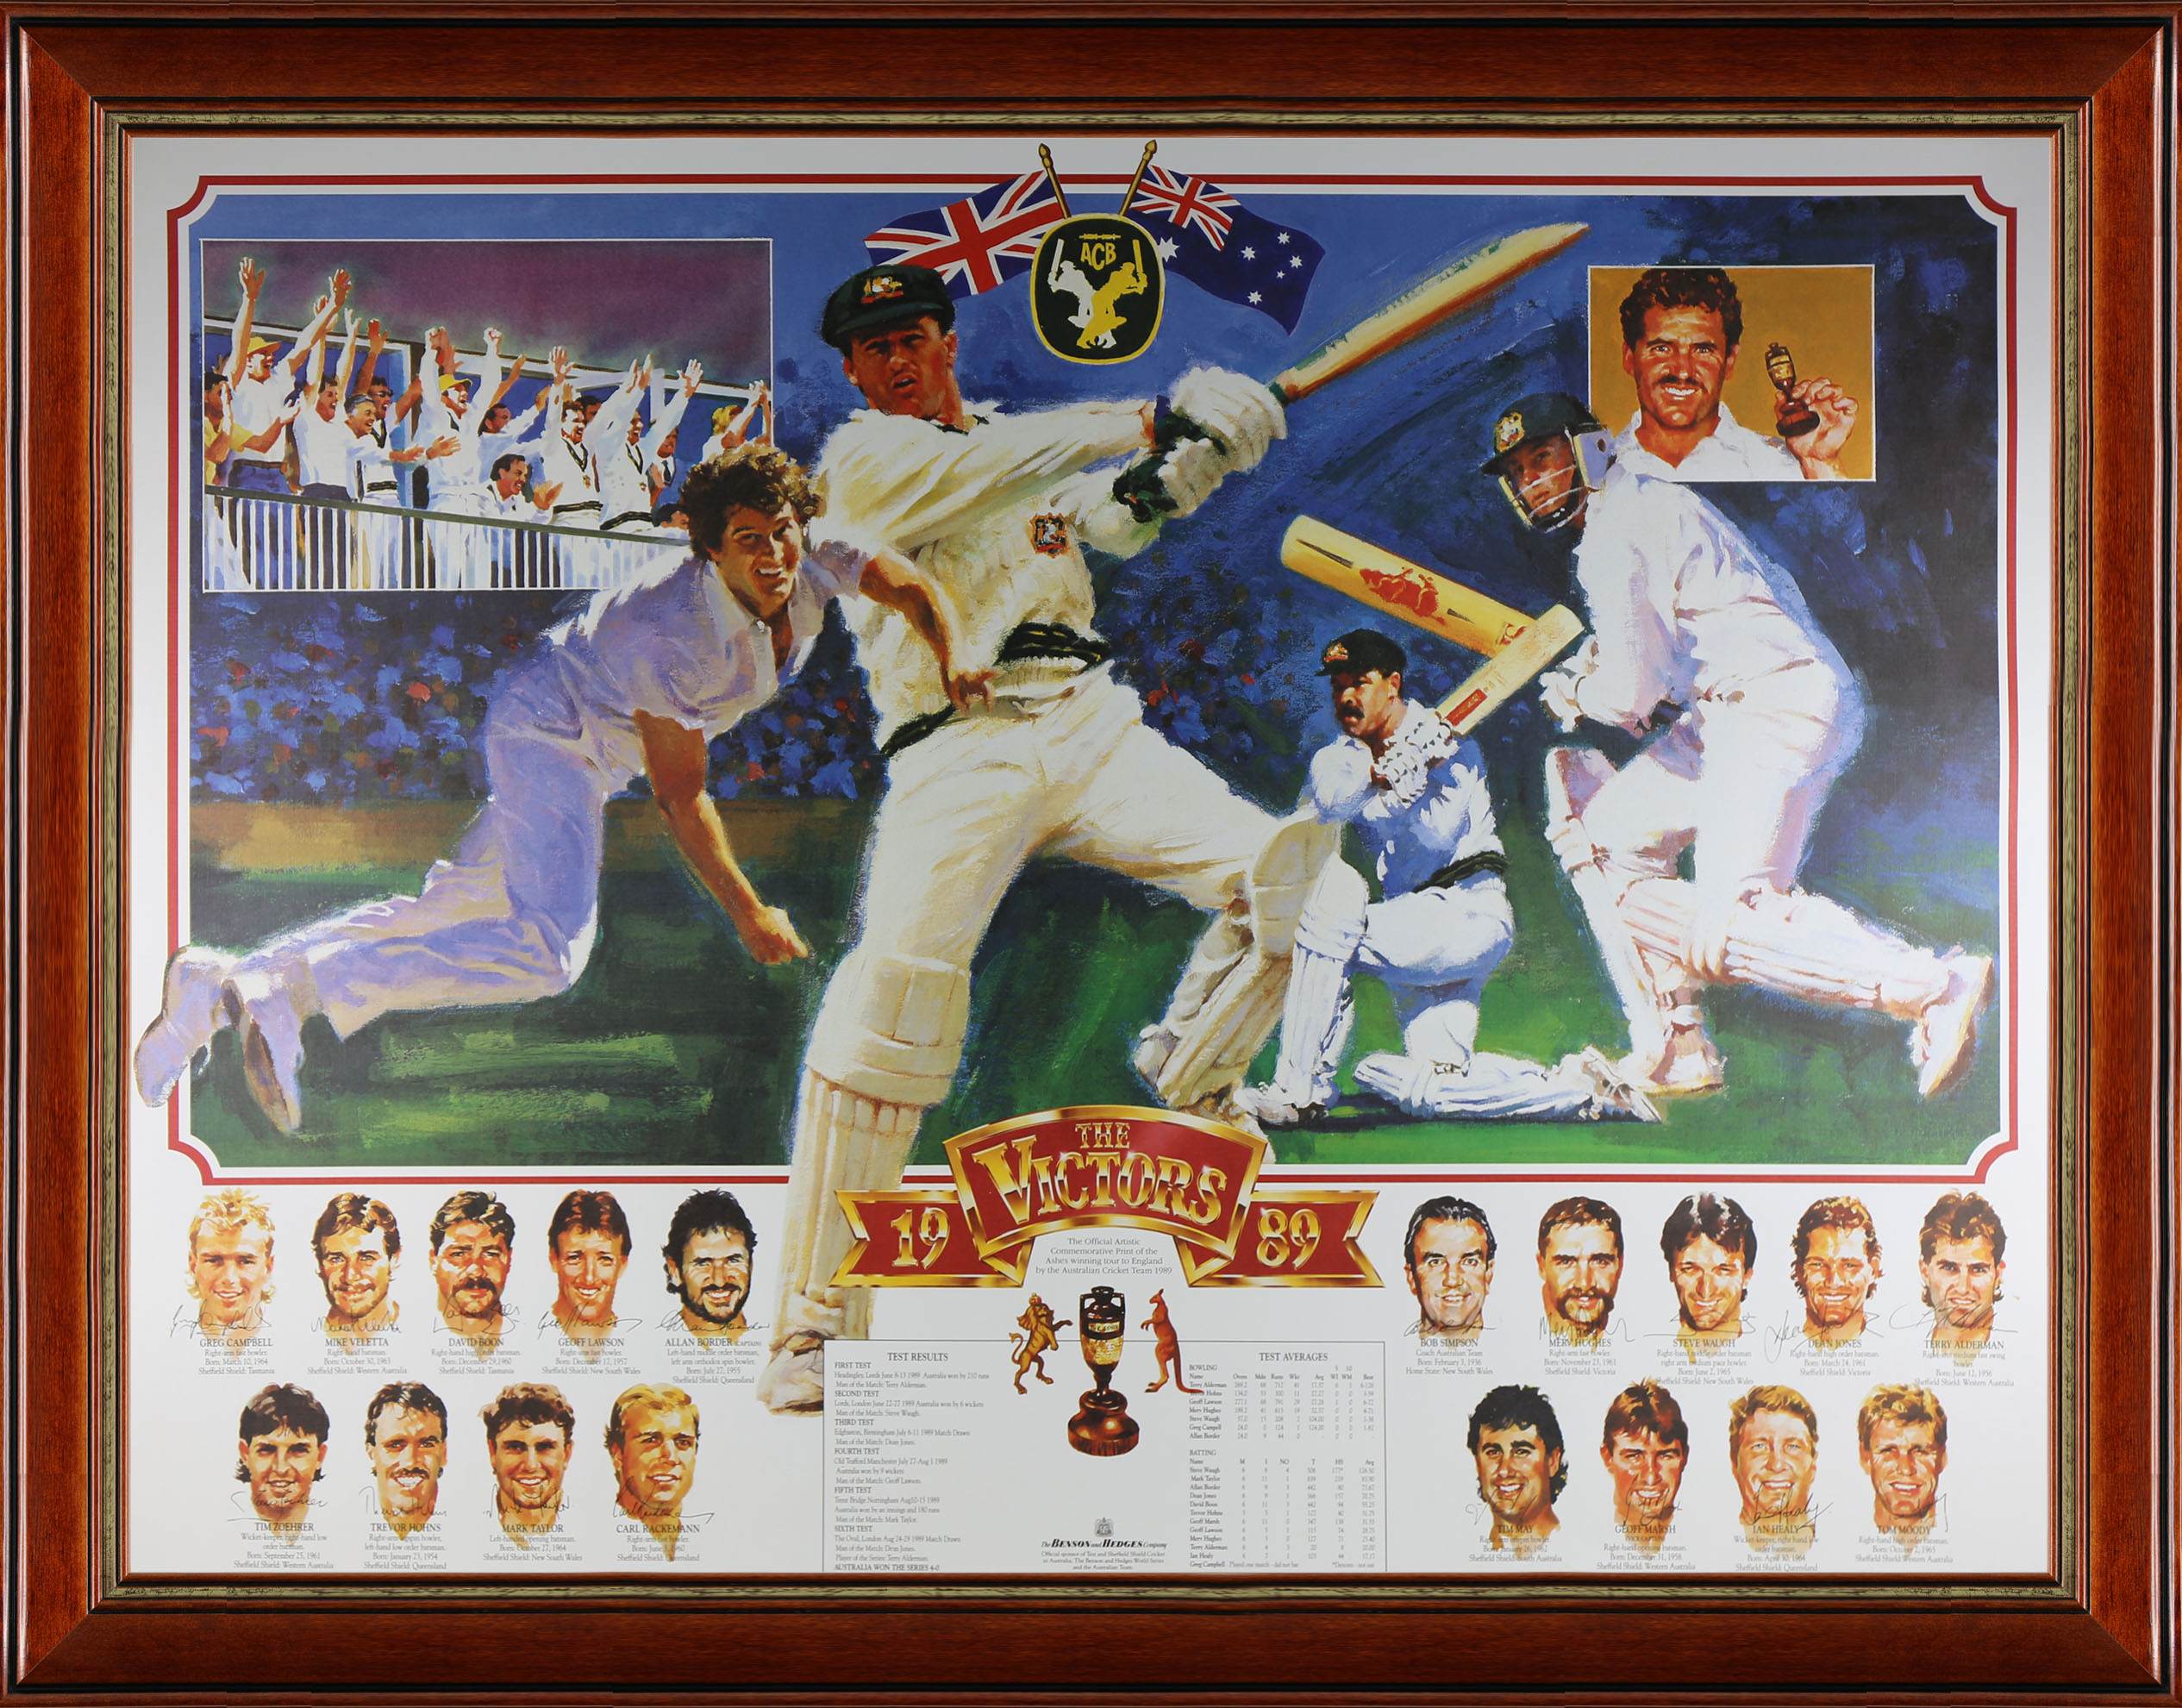 The Victors 1989 Ashes Tour of England Cricket Memorabilia. Signed by the 1989 Ashes Winning Australian Team.